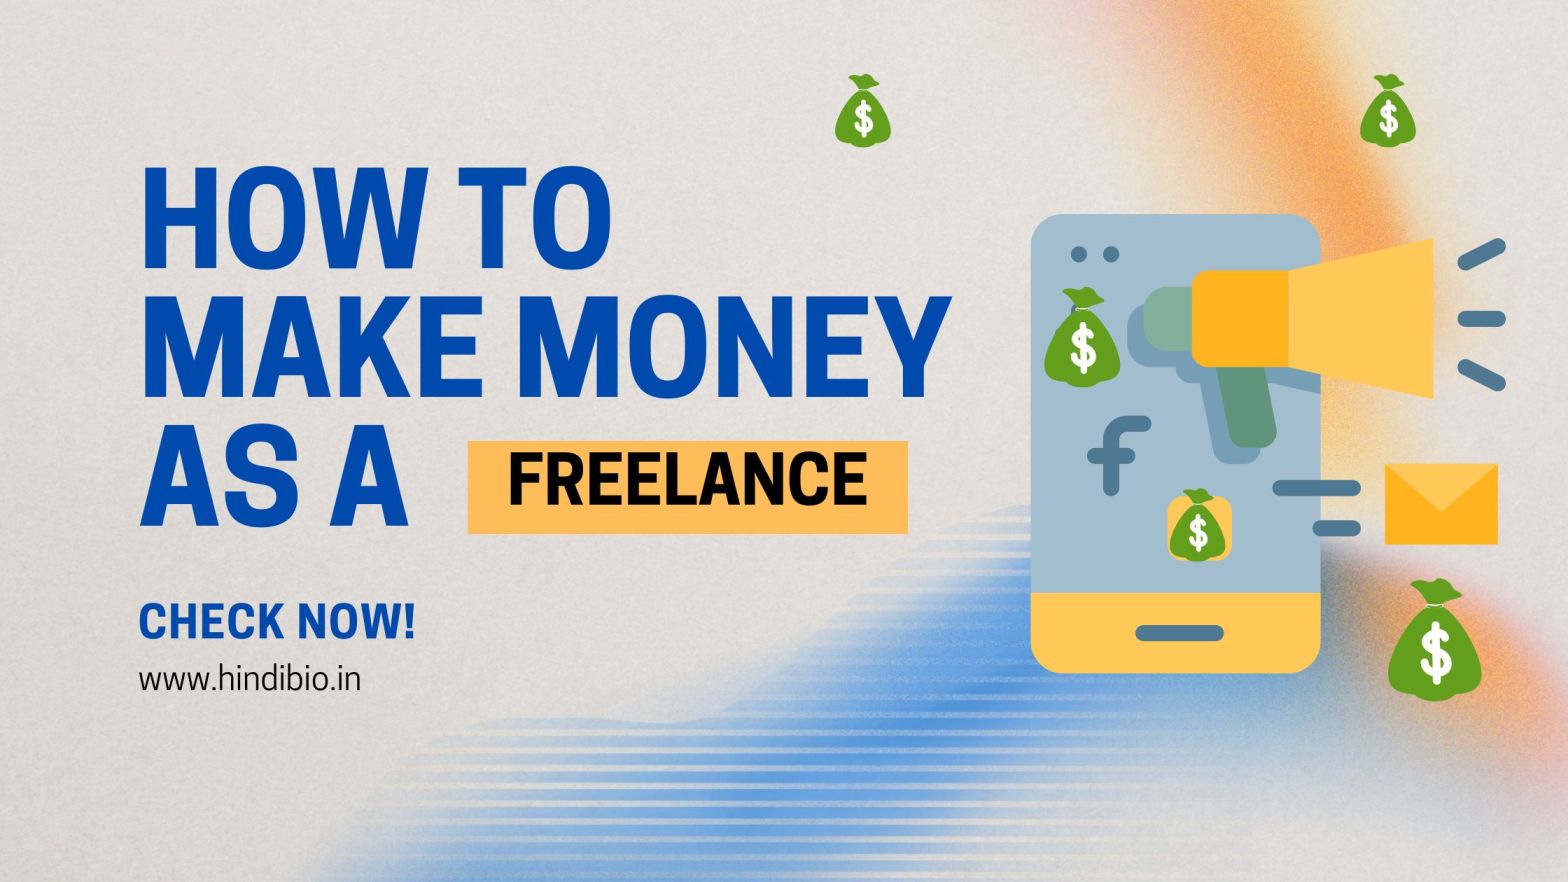 How To Make Money as a Freelance